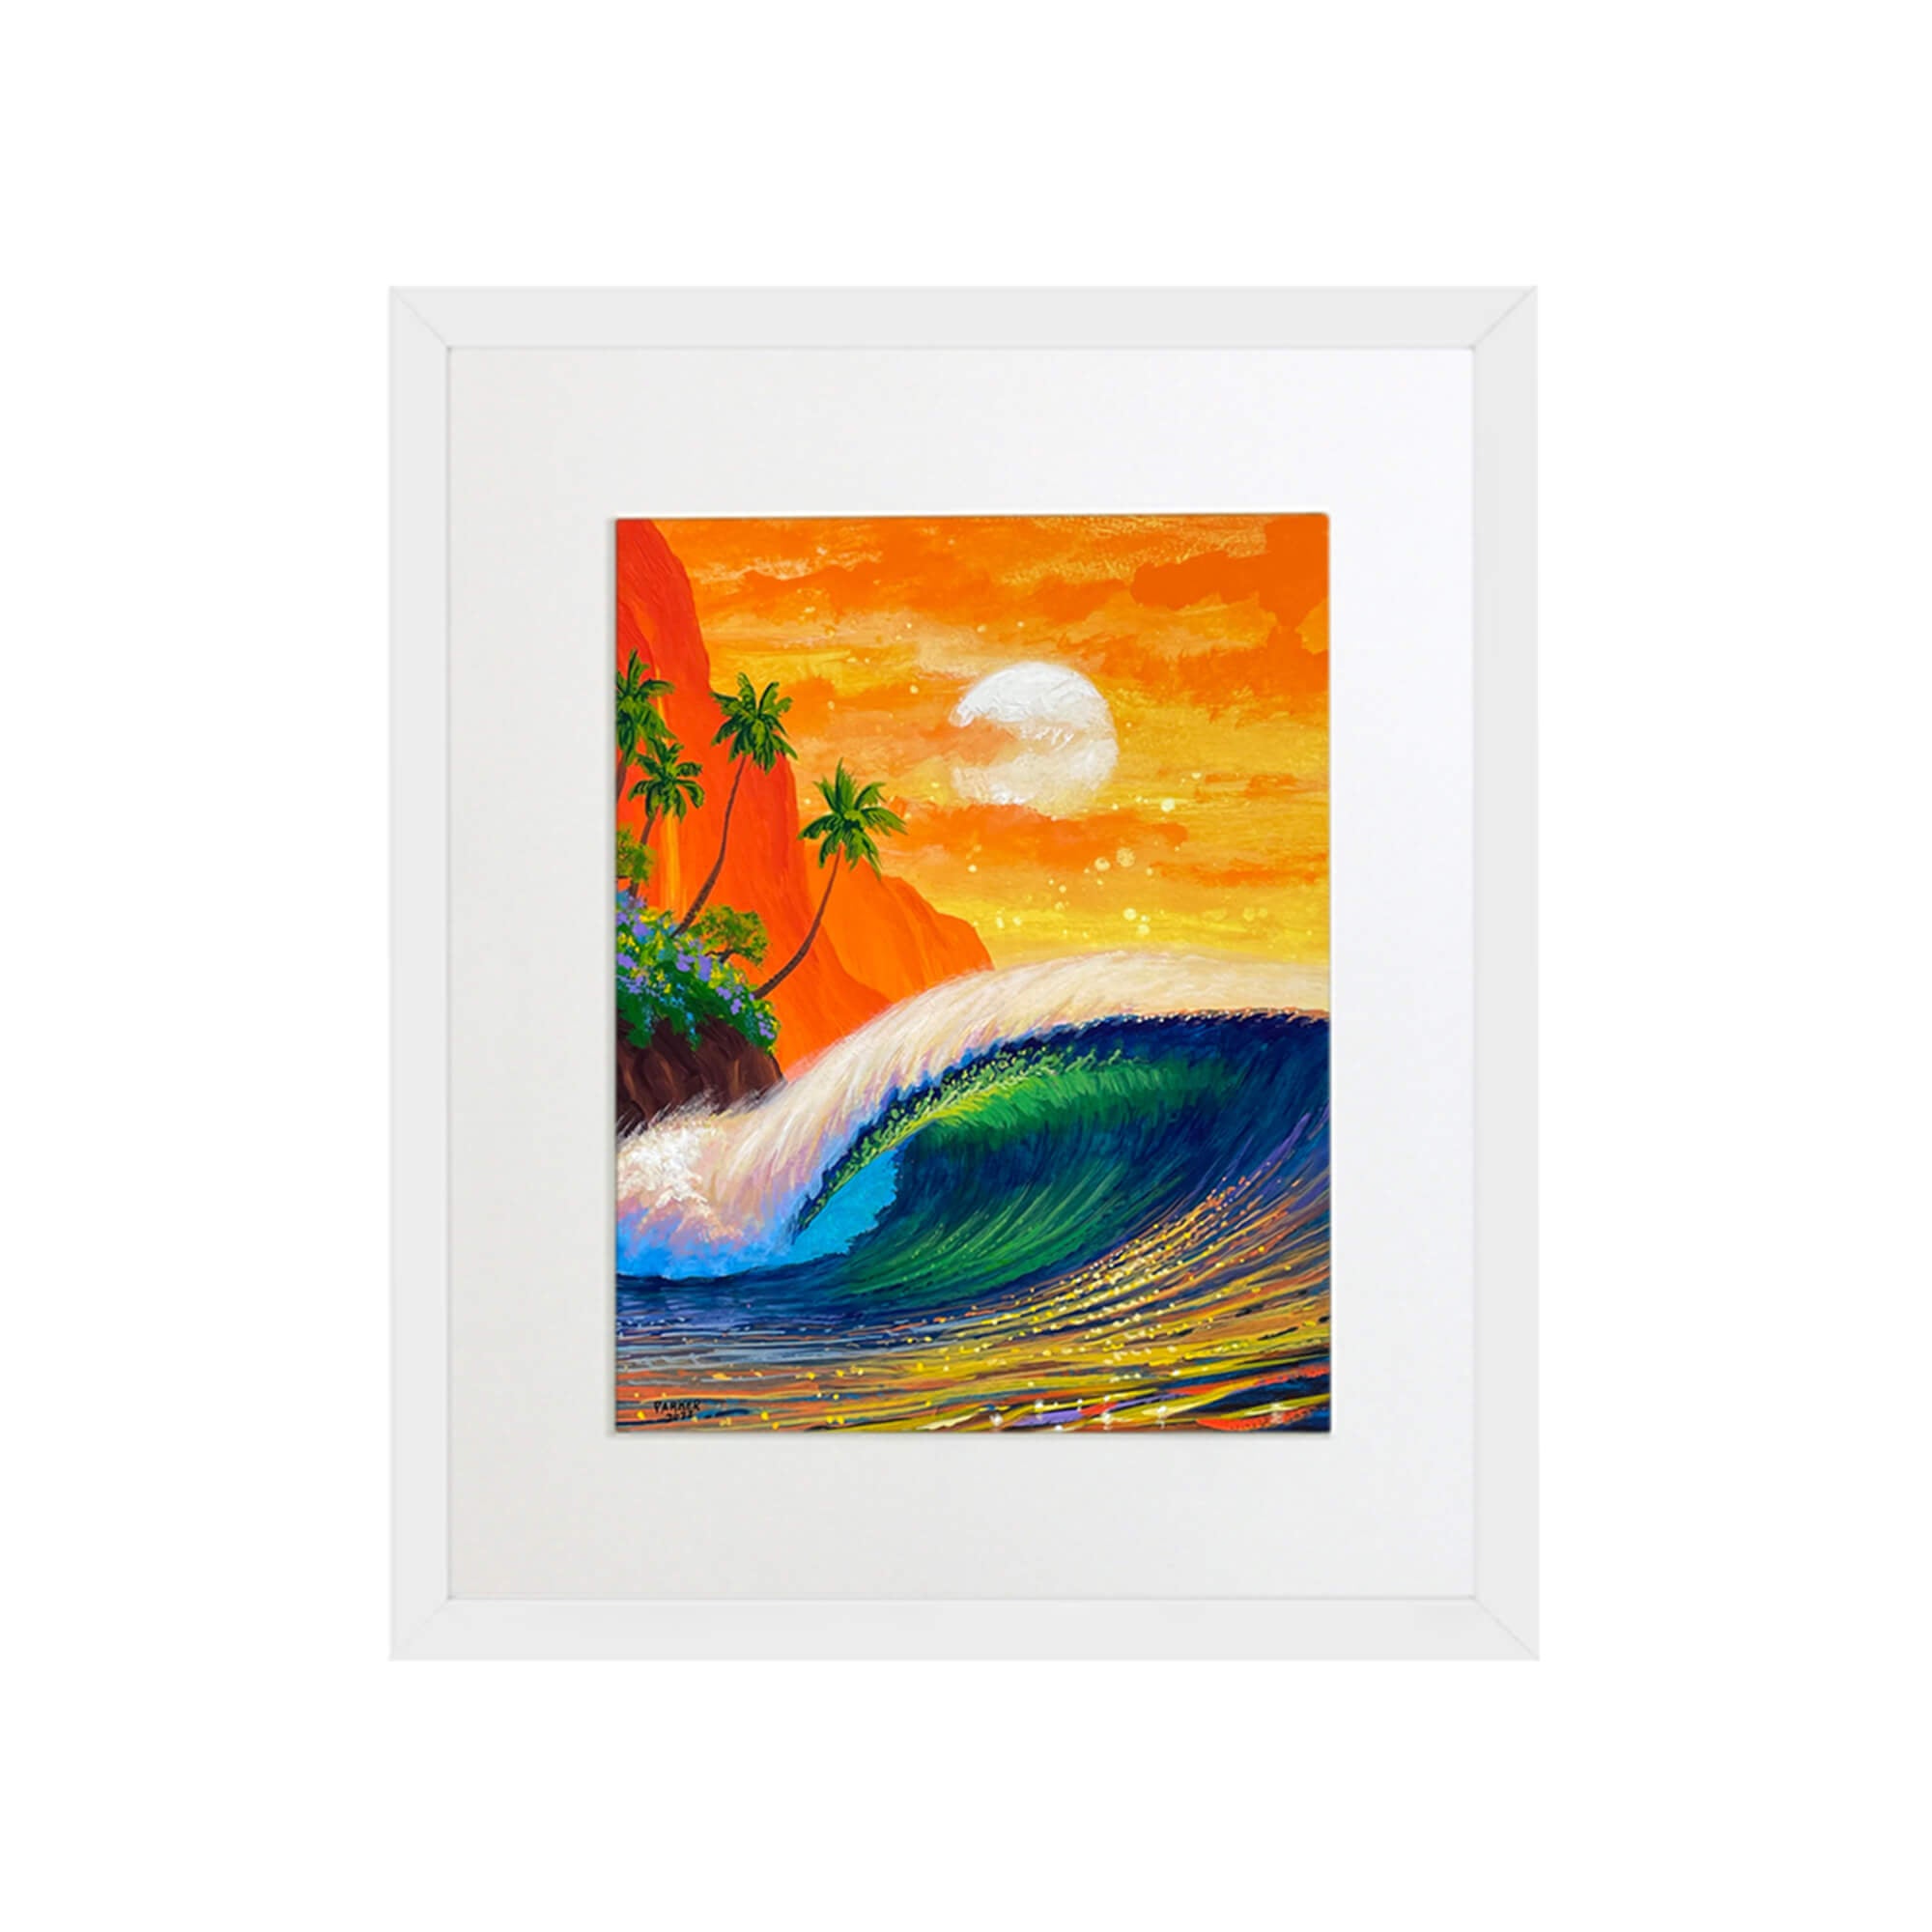 Large crashing wave and vibrant yellow and orange sunset by Hawaii artist Patrick Parker